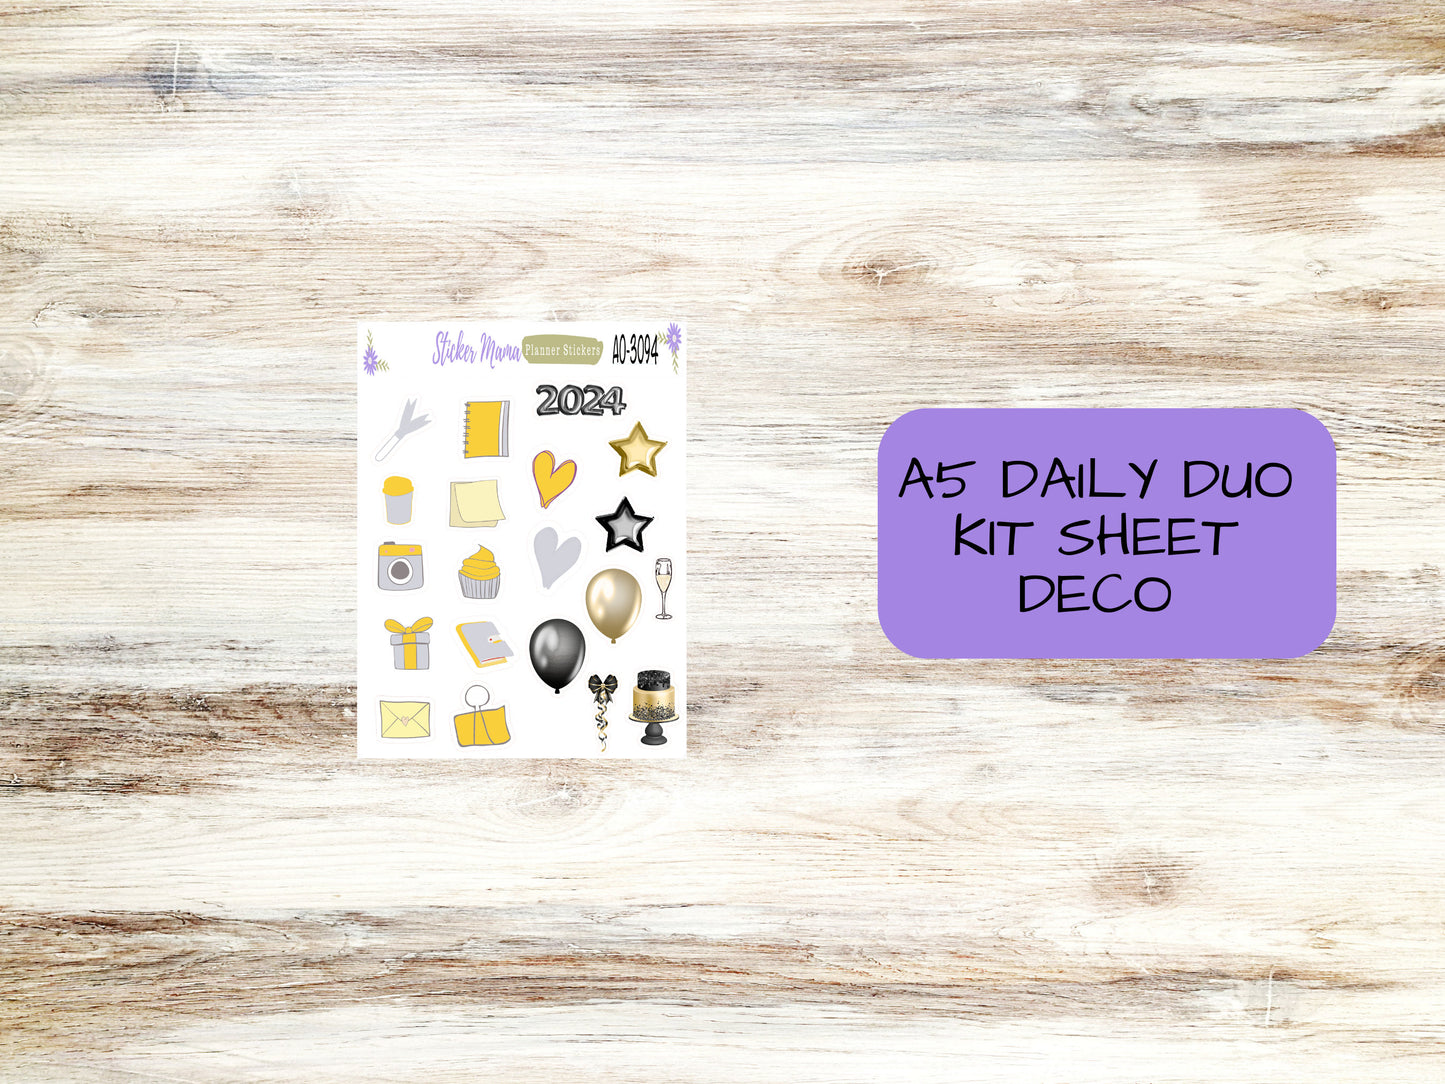 A5-Daily Duo-3094 || Happy New Year || Planner Stickers - Daily Duo A5 Planner - Daily Duo Stickers - Daily Planner